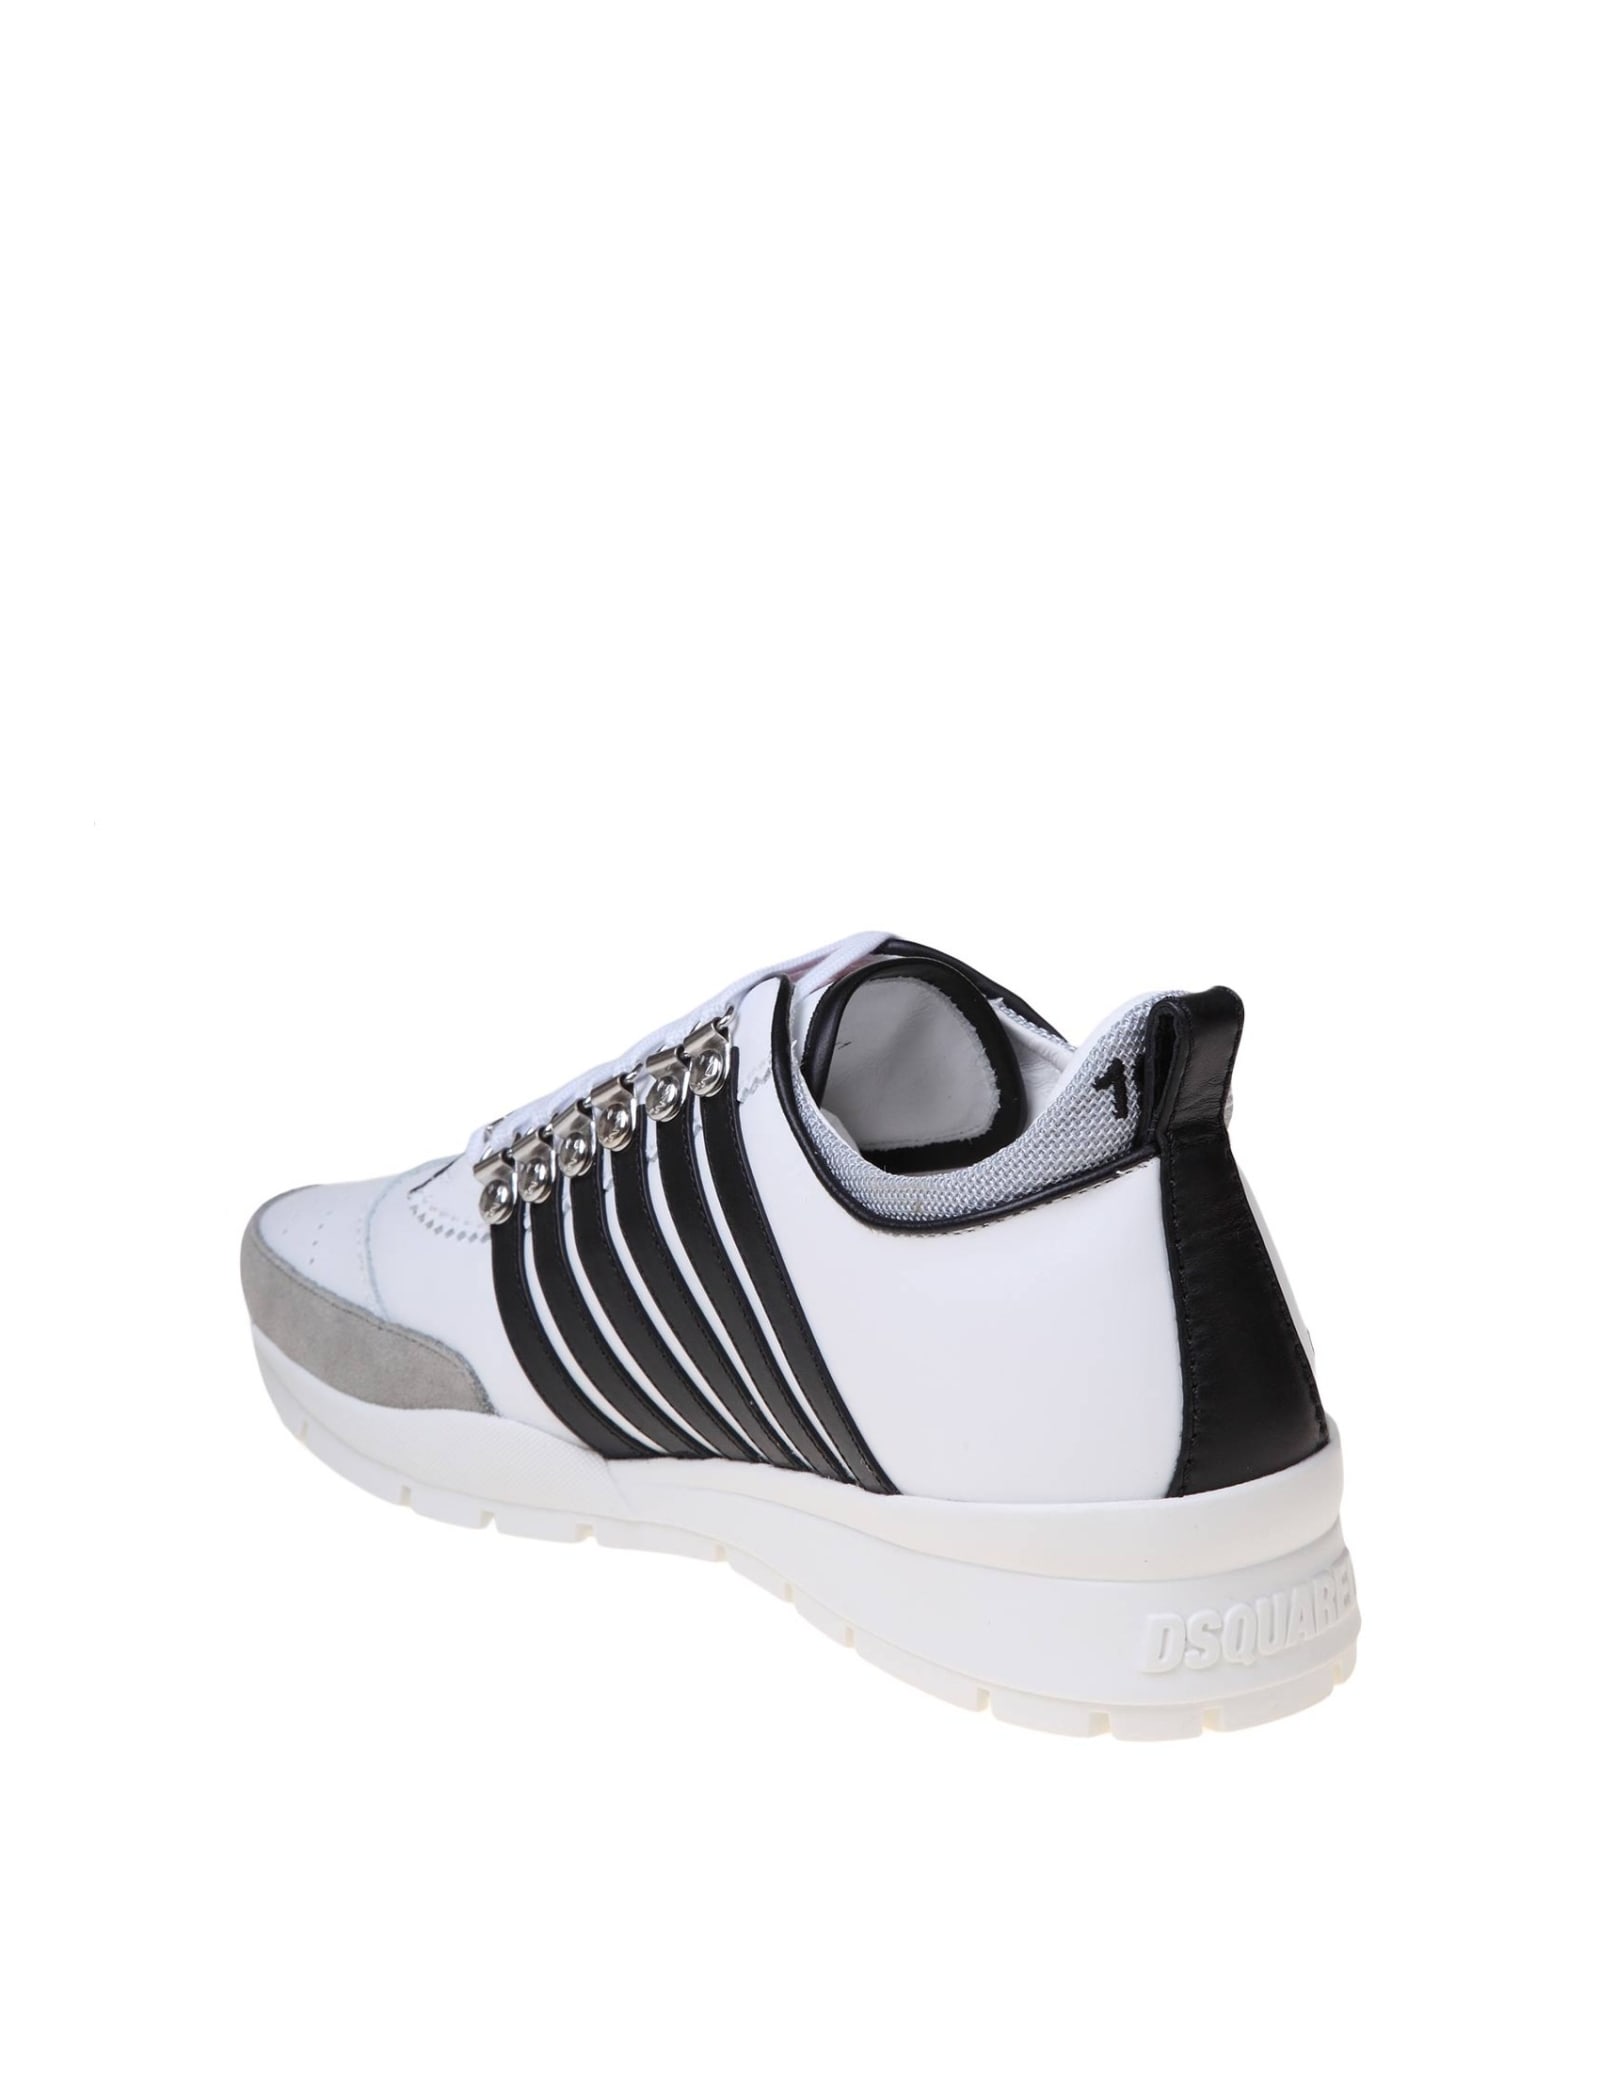 Shop Dsquared2 Legendary Sneakers In Black And White Leather In Bianco